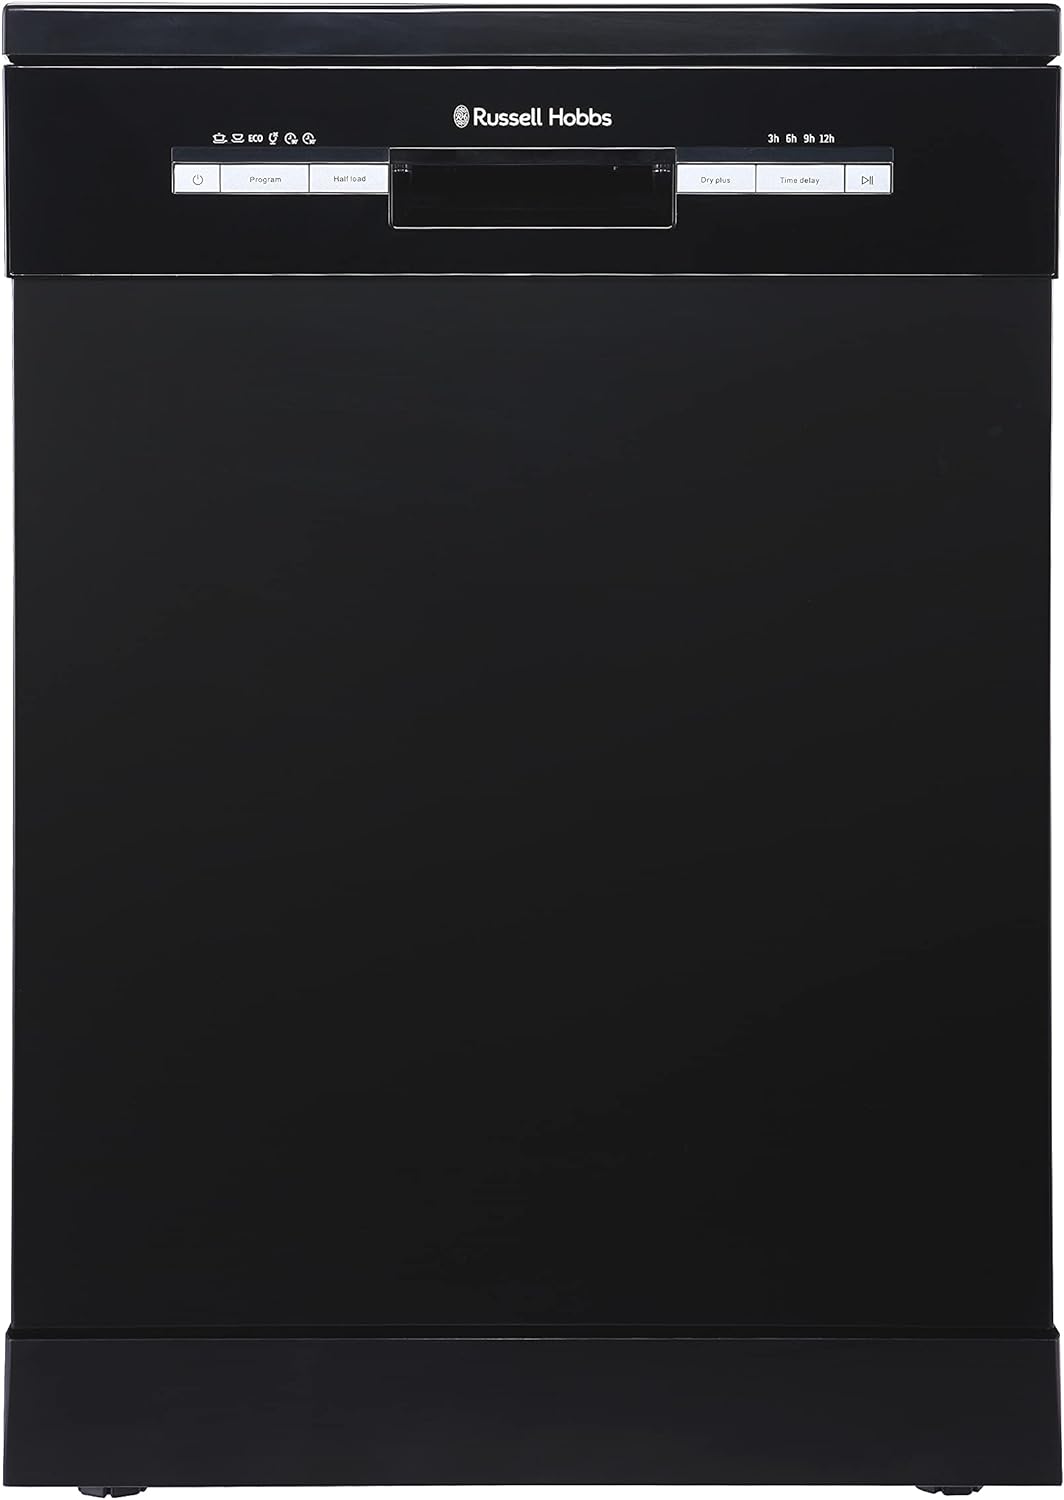 Russell Hobbs RHDW3B - M Freestanding Full Size Dishwasher, 5 Temperature Settings, 11 liters, Black, Noise level: decibels 49 - Amazing Gadgets Outlet